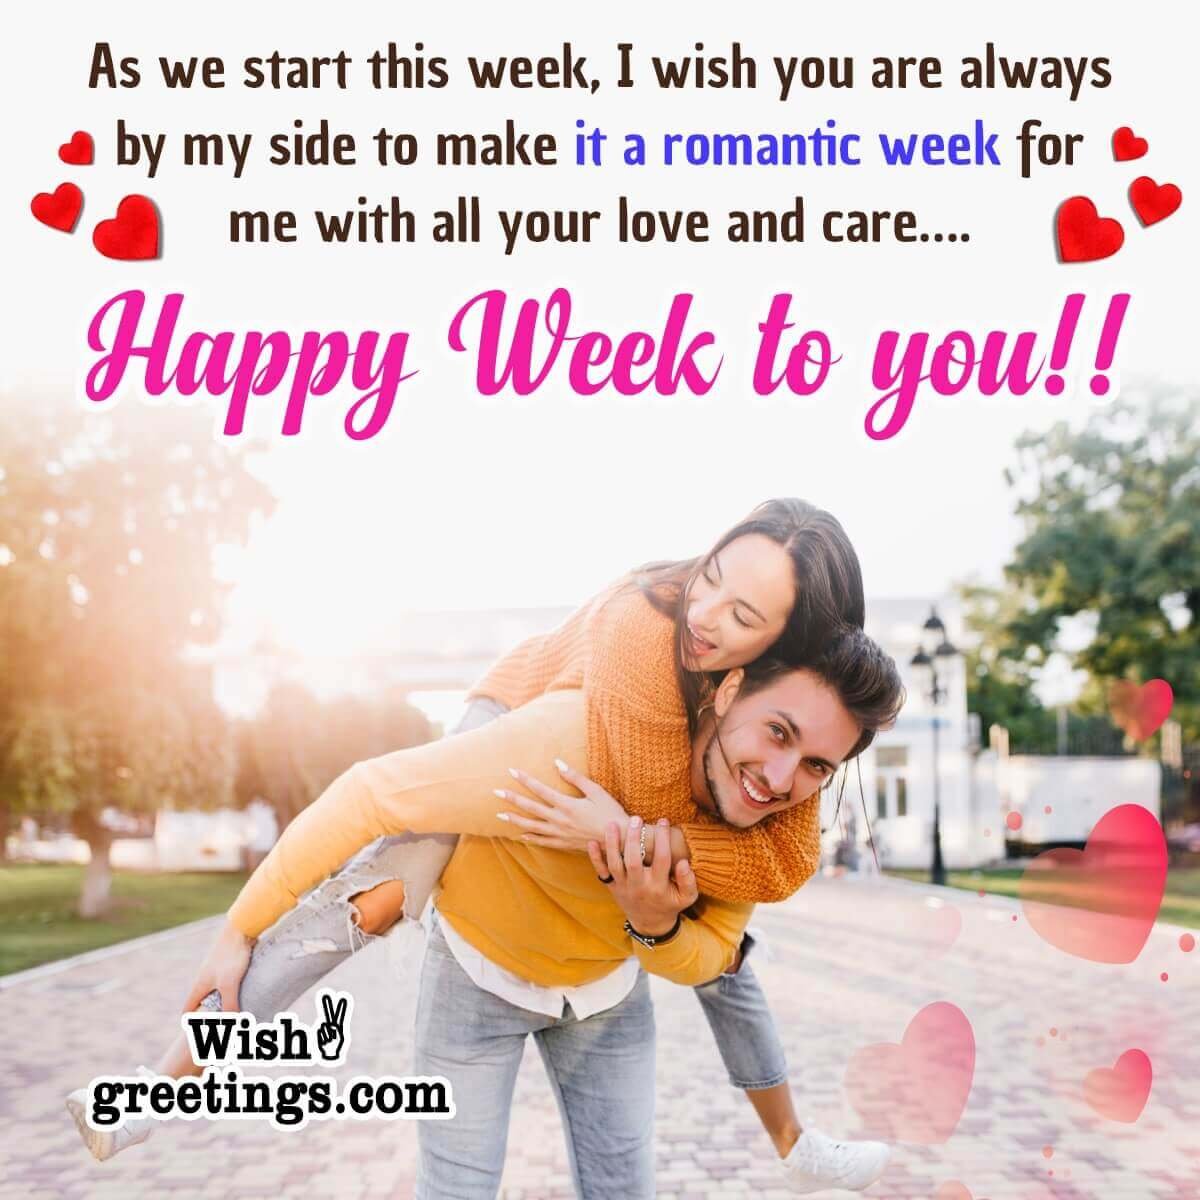 New Week Romantic Message For Lover Pic